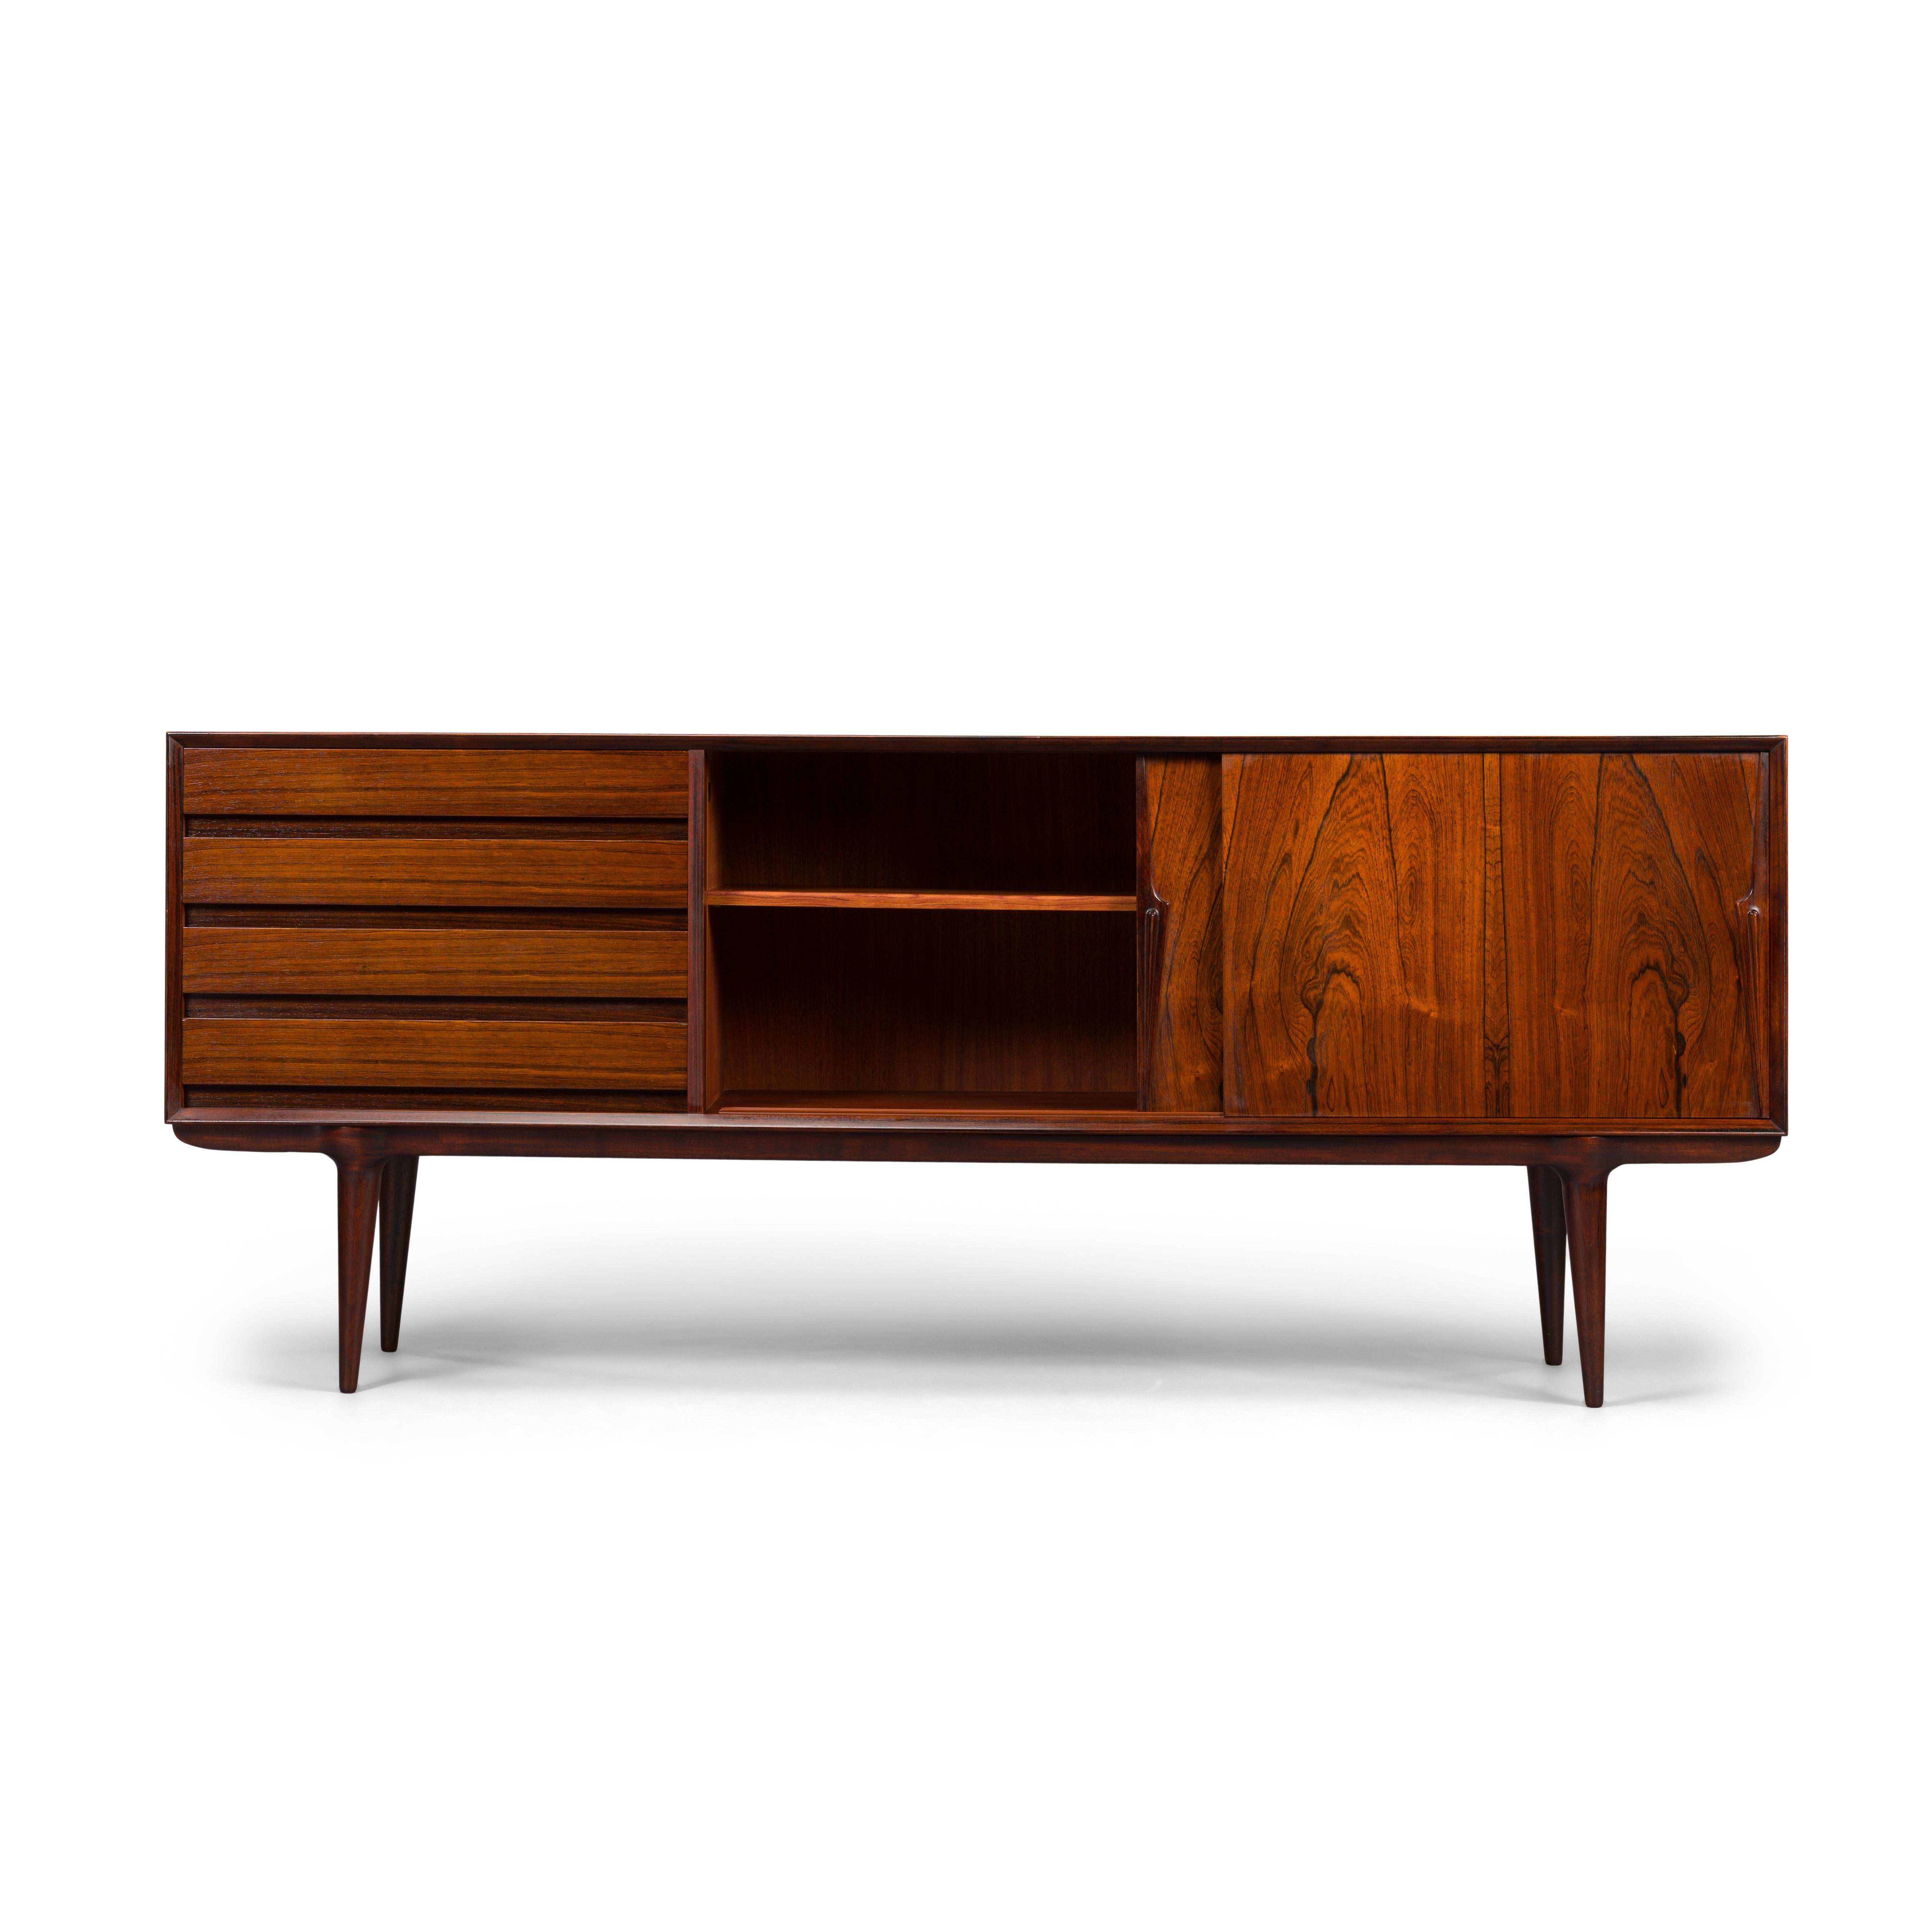 A Classic among credenza's, this model #18 credenza designed by Gunni Omann for Omann Jun Møbelfabrik. Recognizable design features and perfectly proportioned, with a low profile design, this piece will work well with any modern decor. Superb level